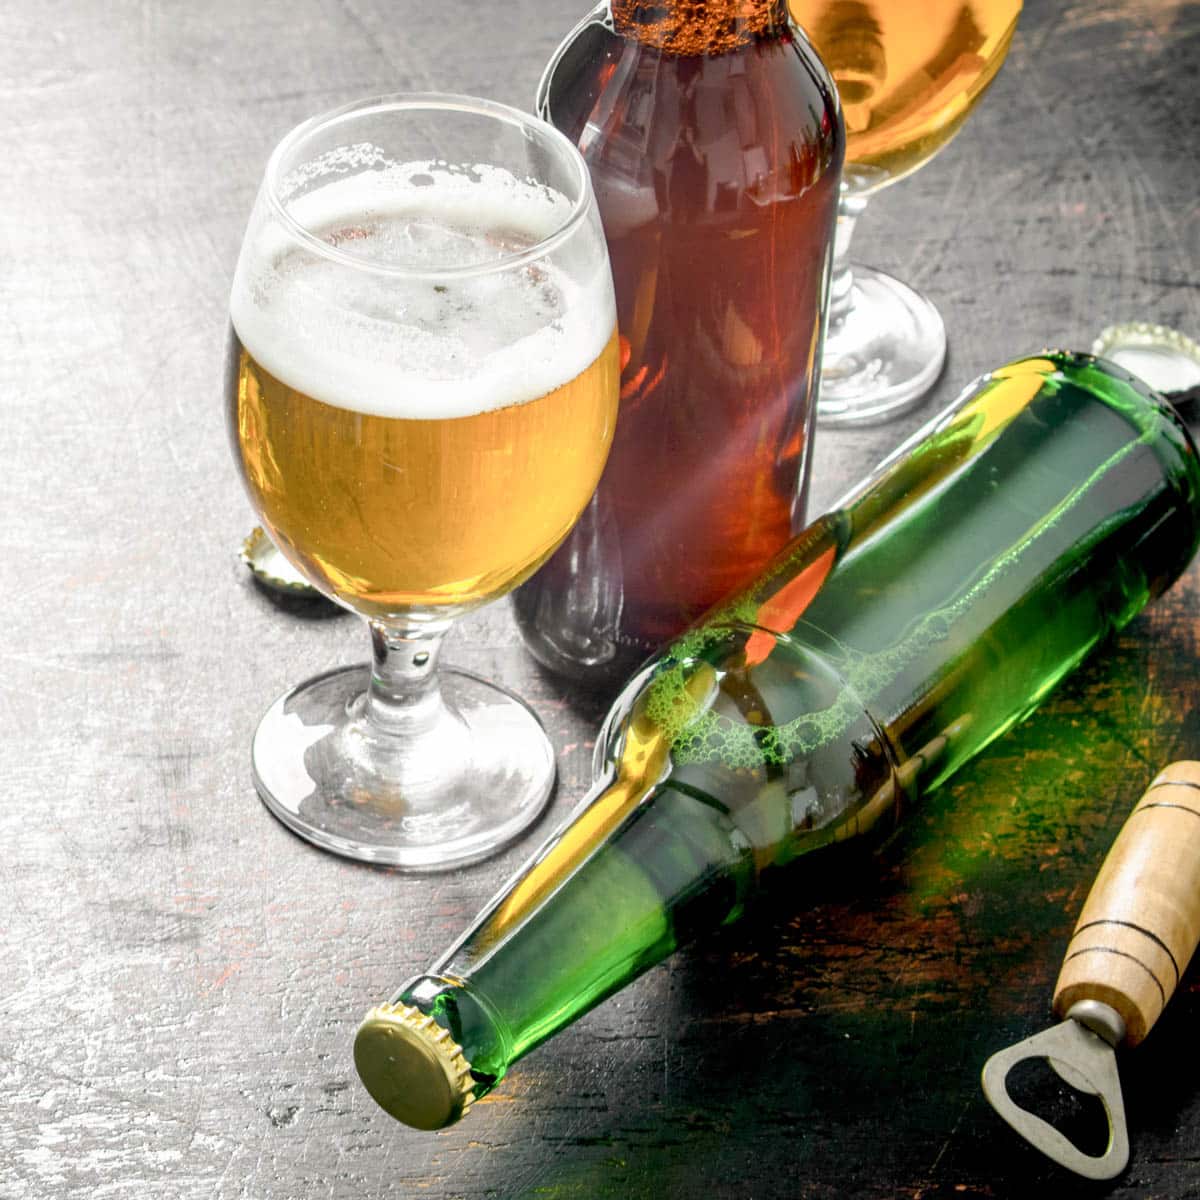 Glass of beer with beer bottles next to it on a rustic background.